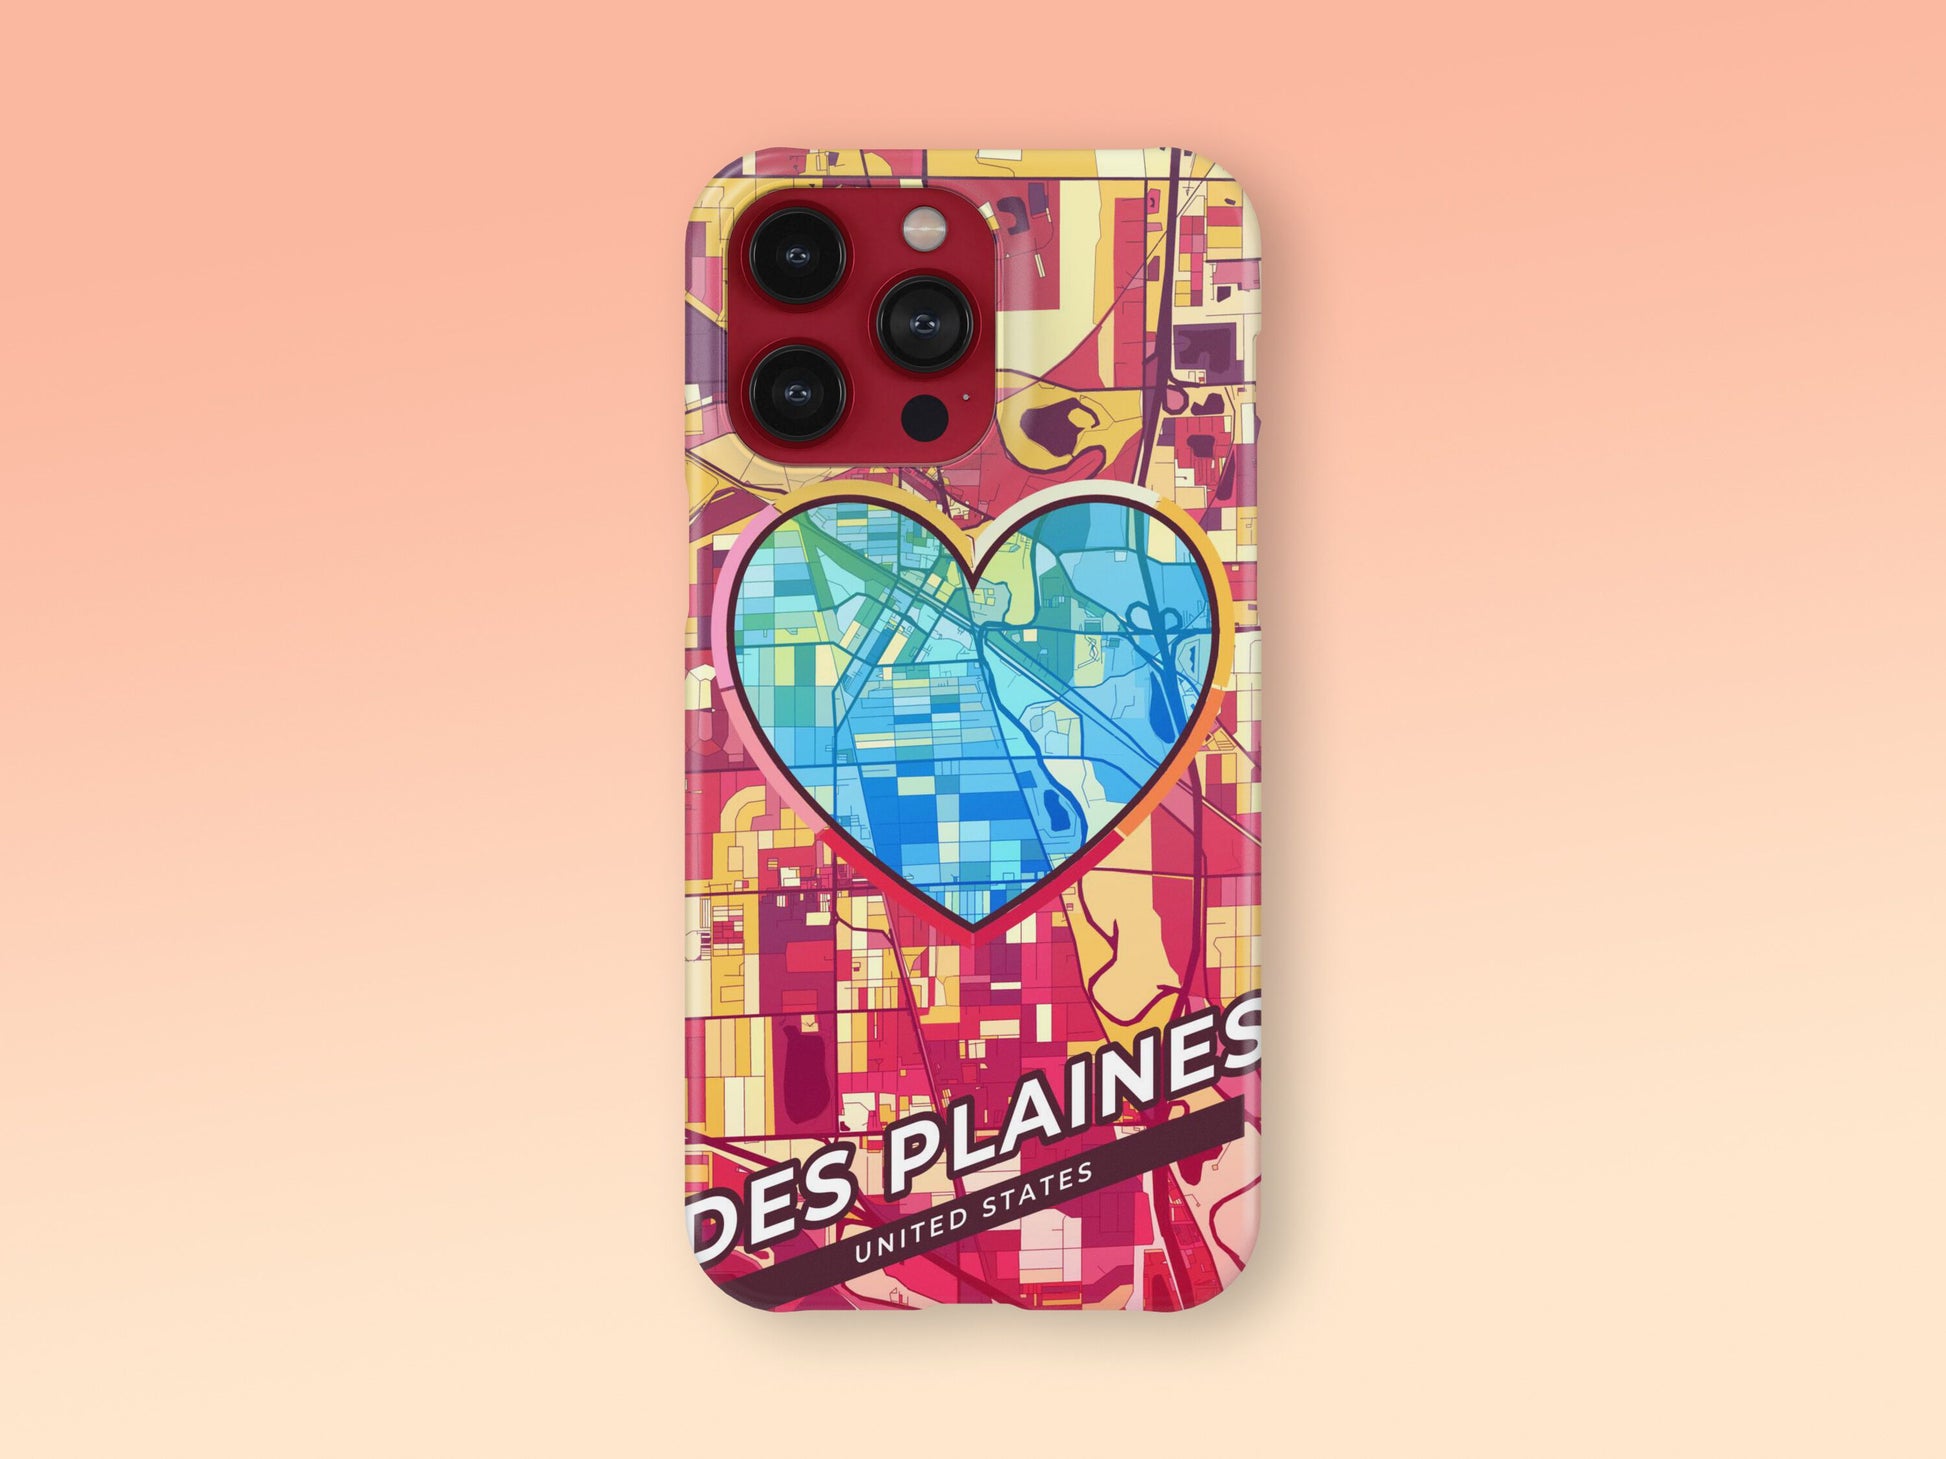 Des Plaines Illinois slim phone case with colorful icon. Birthday, wedding or housewarming gift. Couple match cases. 2